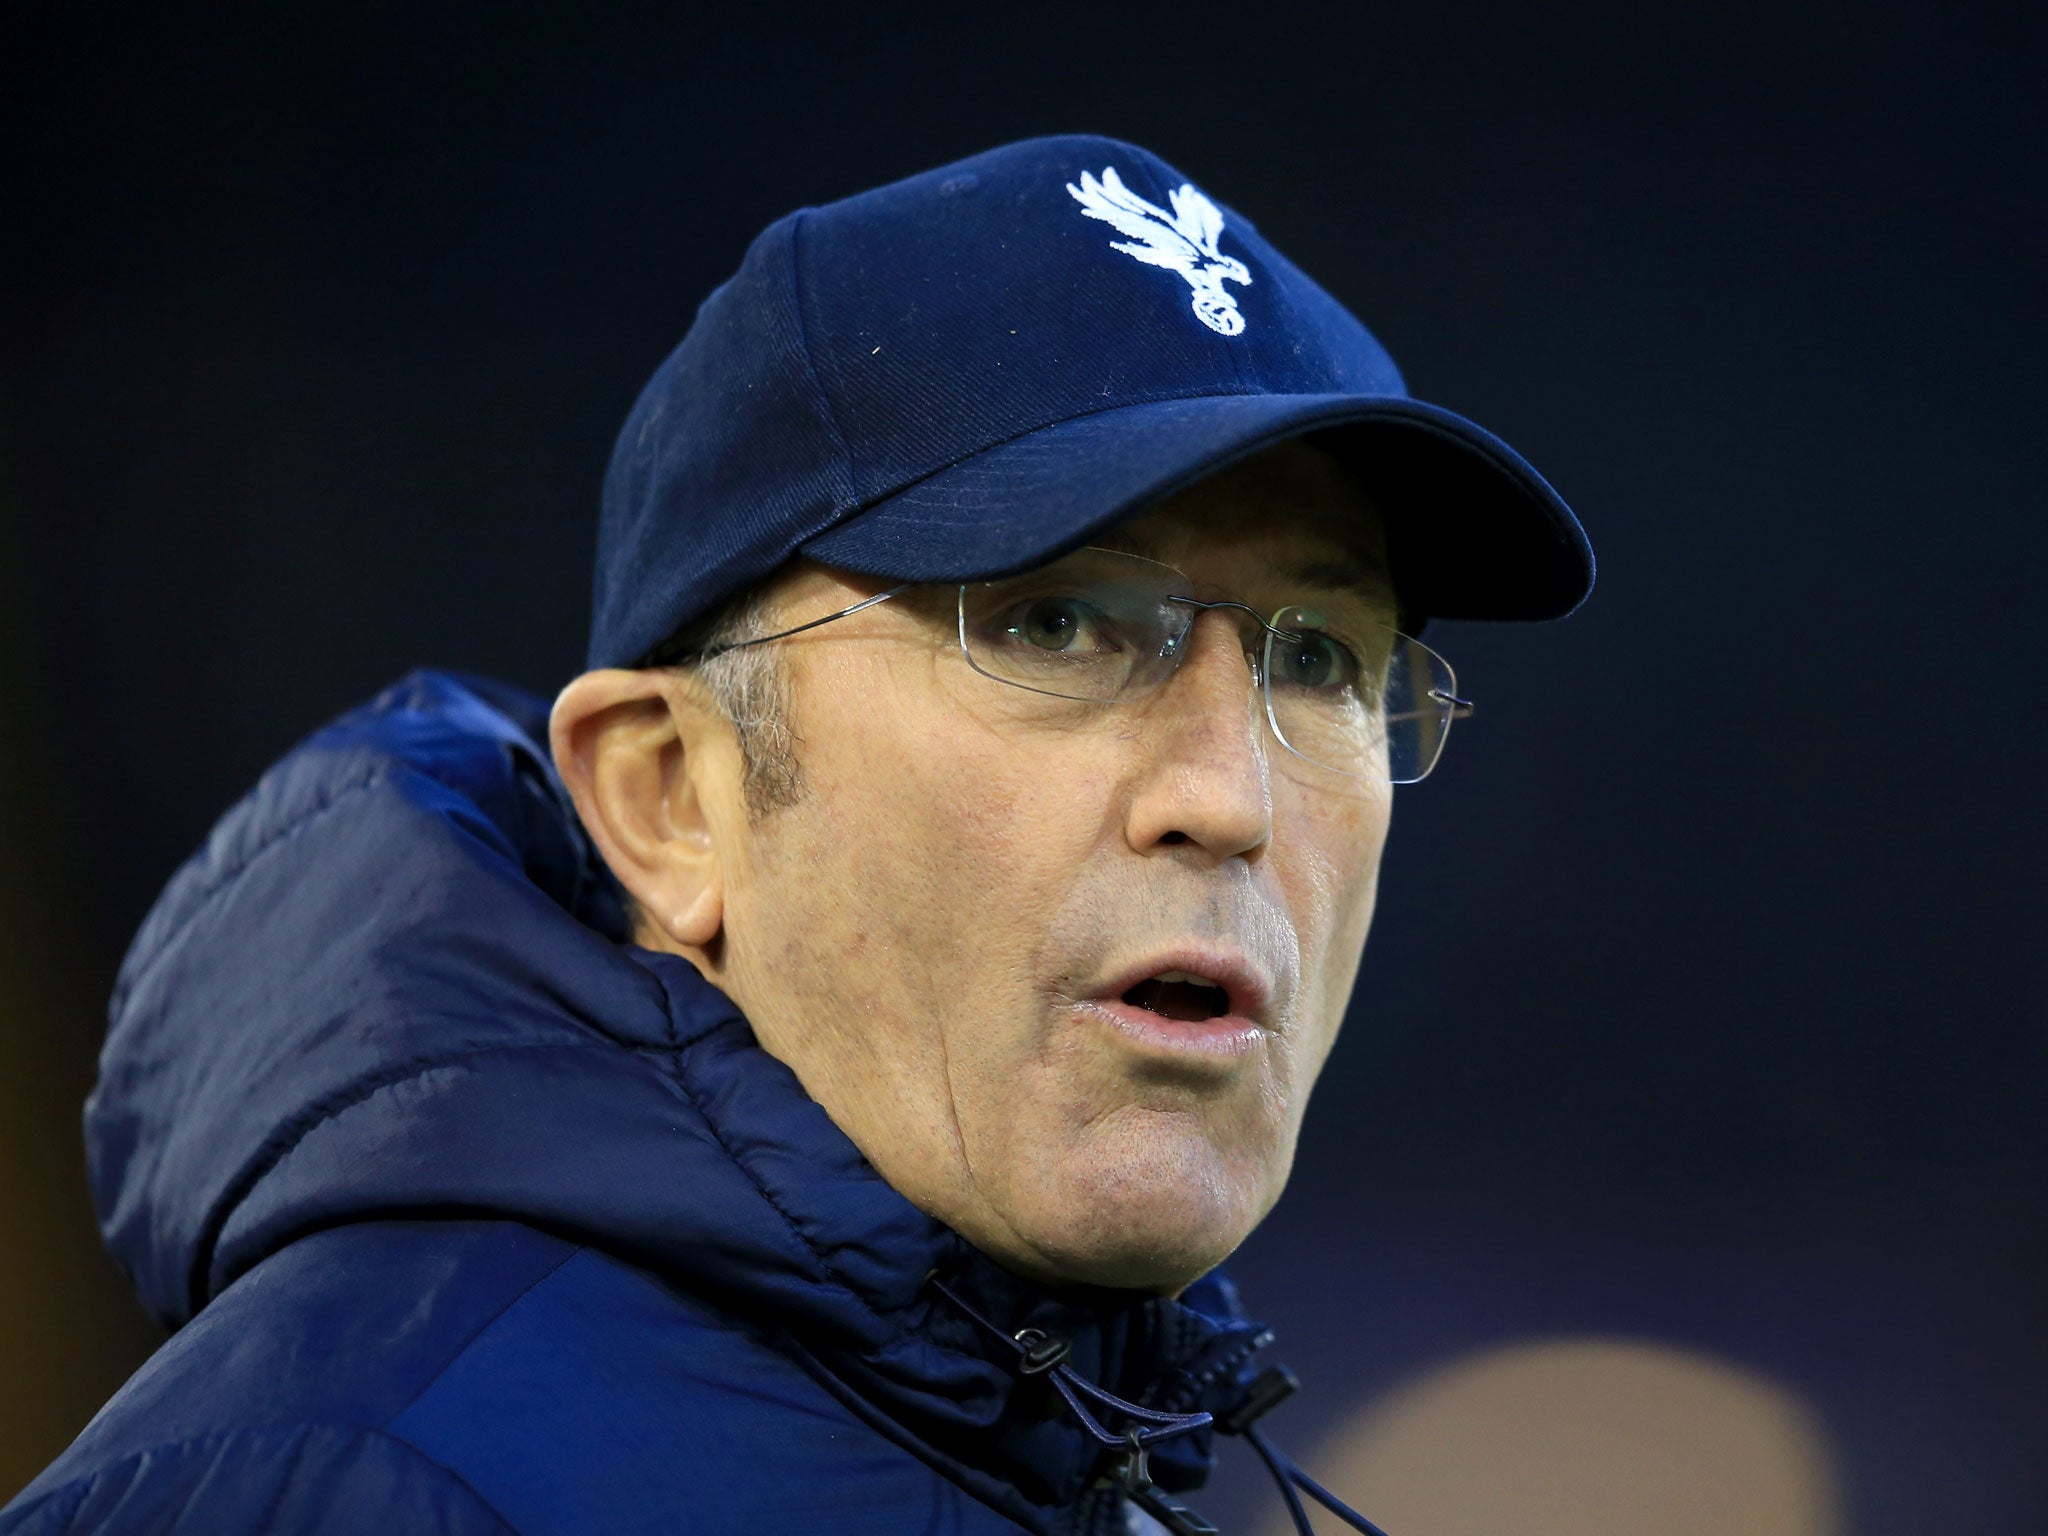 Tony Pulis has been disappointed at the failure to reinforce a team that sits bottom of the table